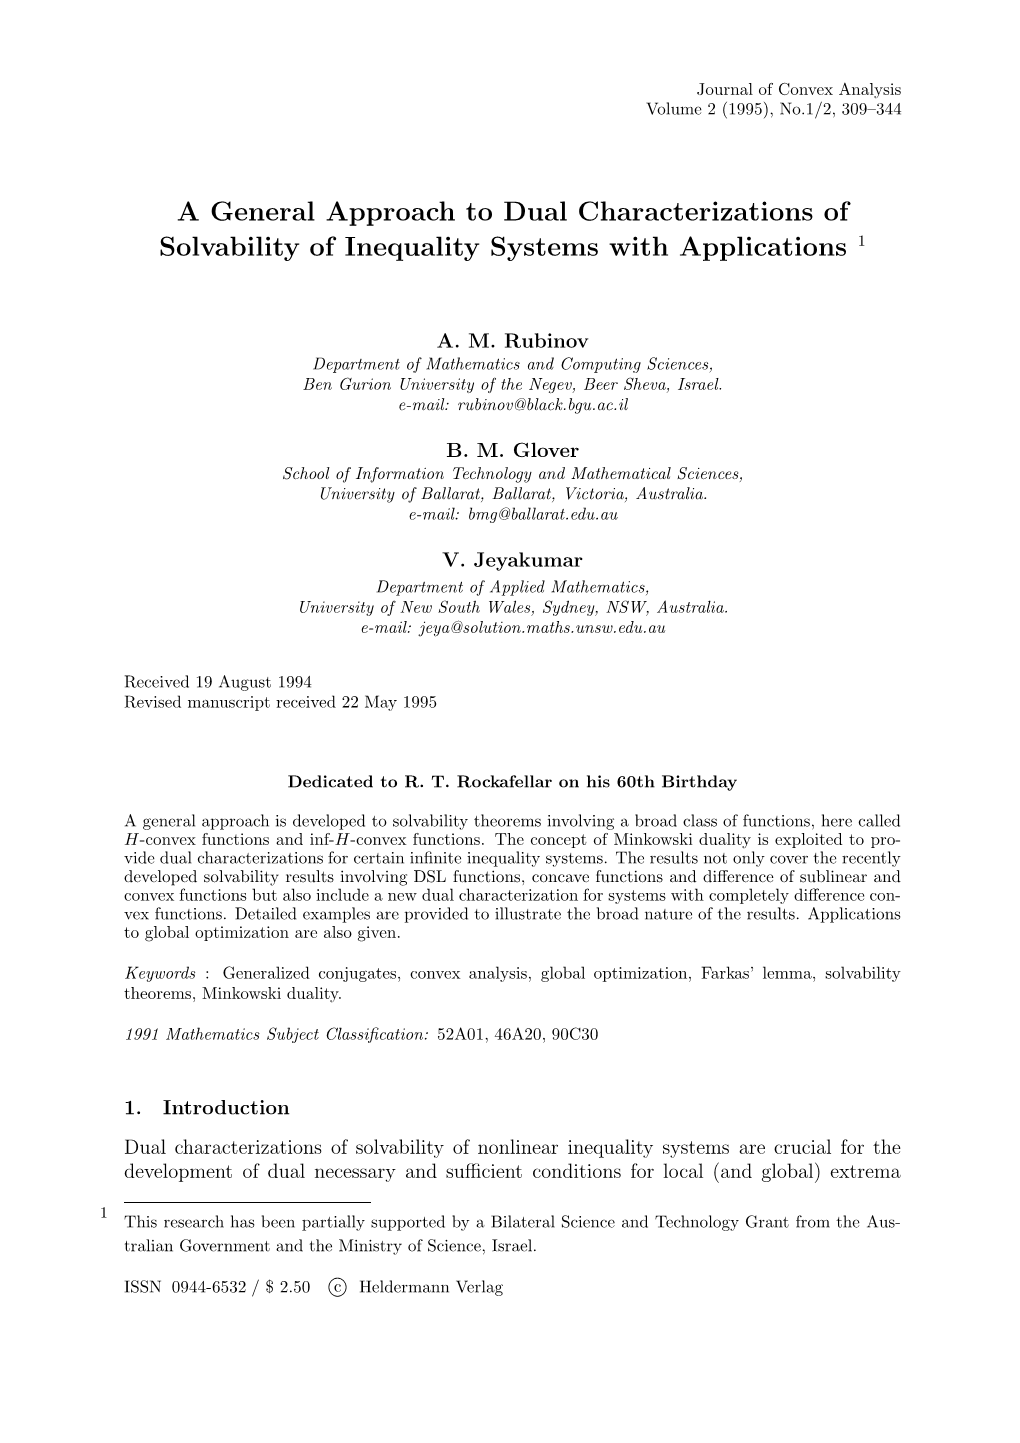 A General Approach to Dual Characterizations of Solvability of Inequality Systems with Applications 1